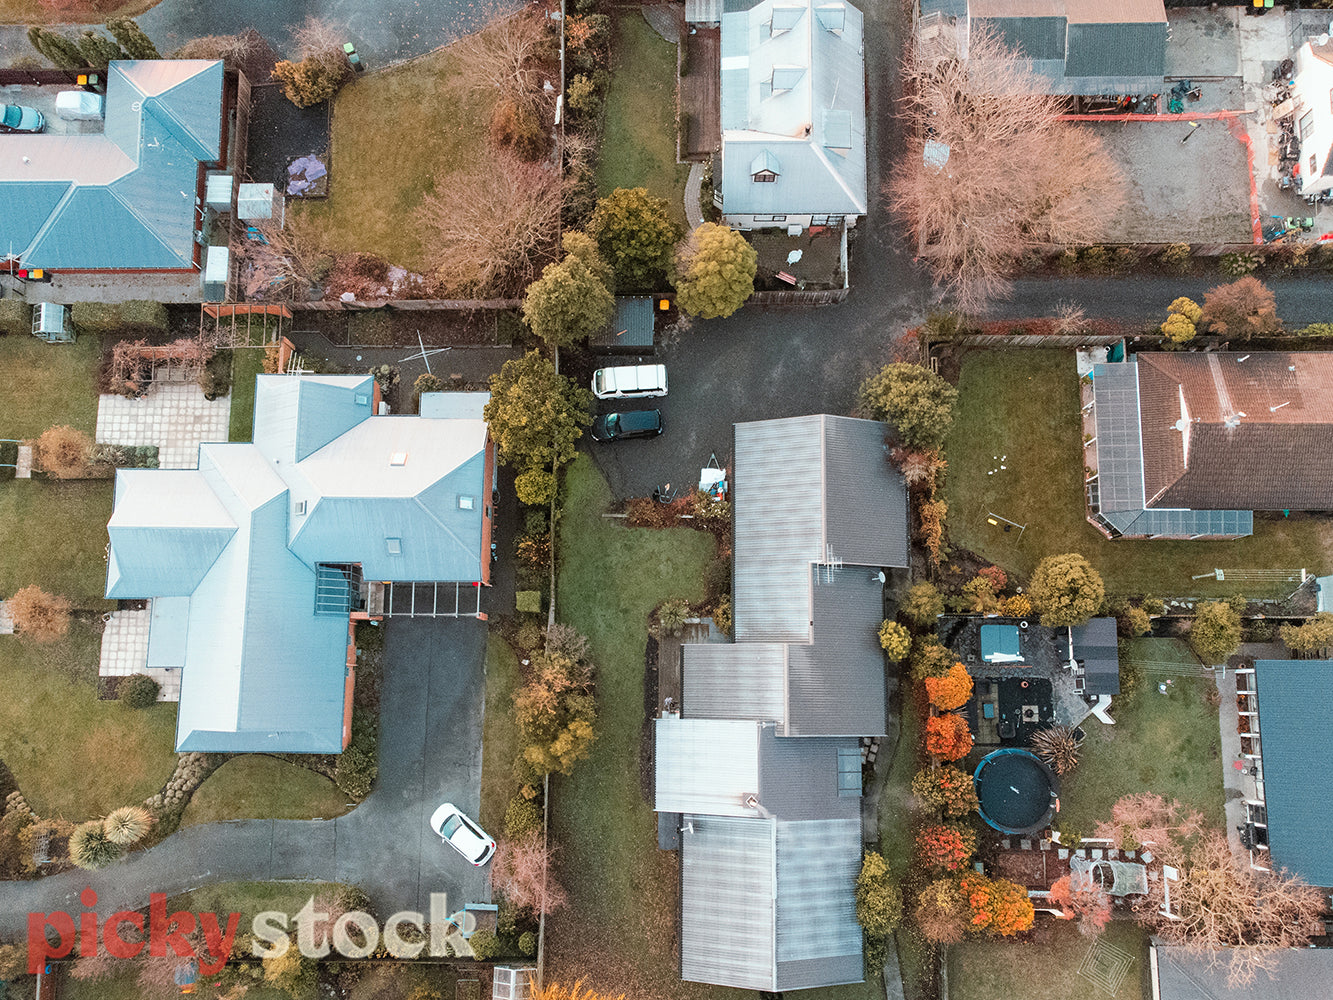 Suburbia from above with trees, cars, driveways peppered in between. 